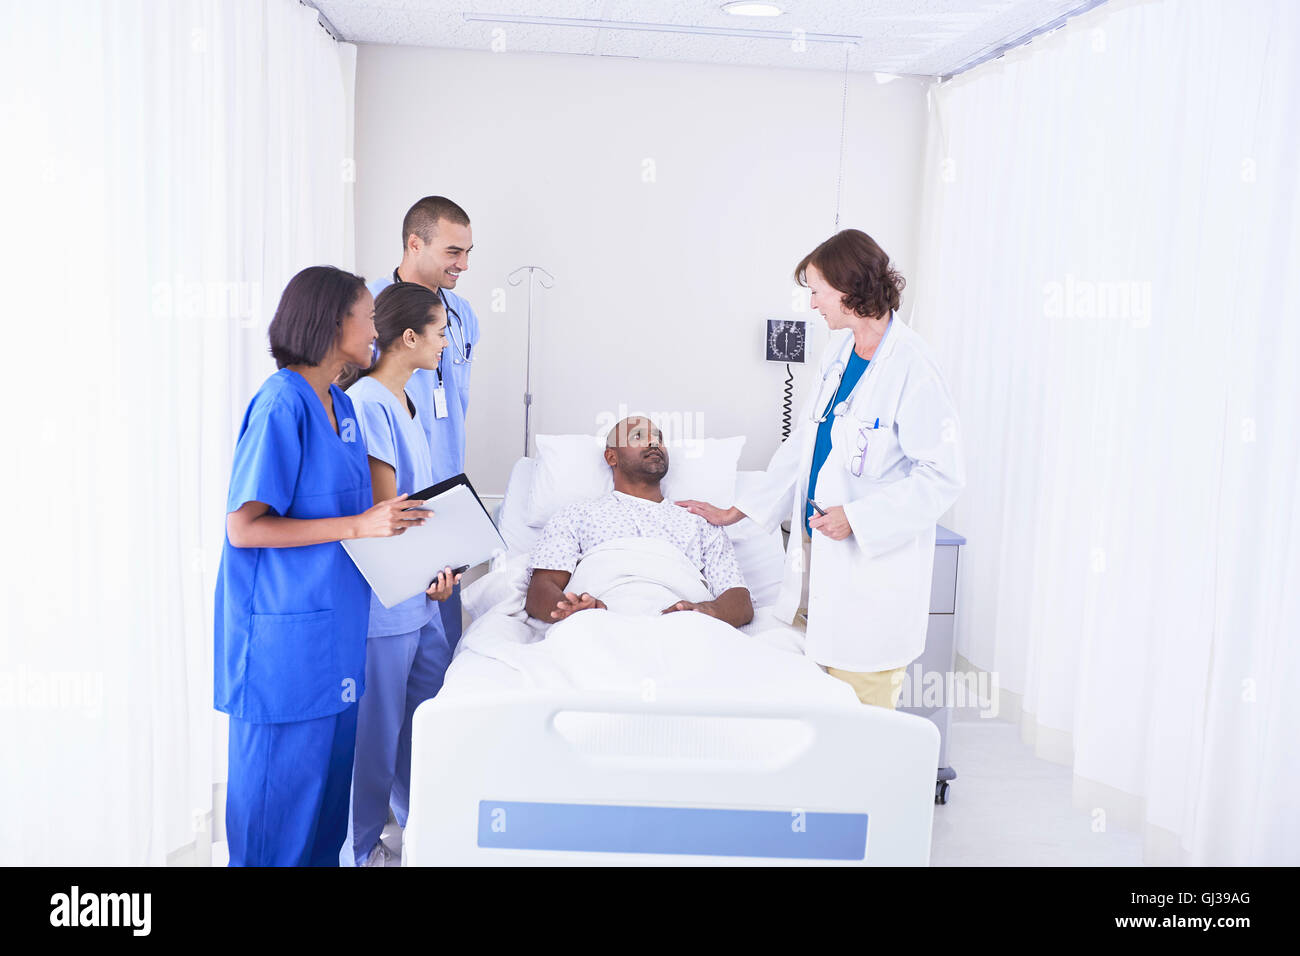 Doctors and nurses surrounding patient in hospital bed Stock Photo